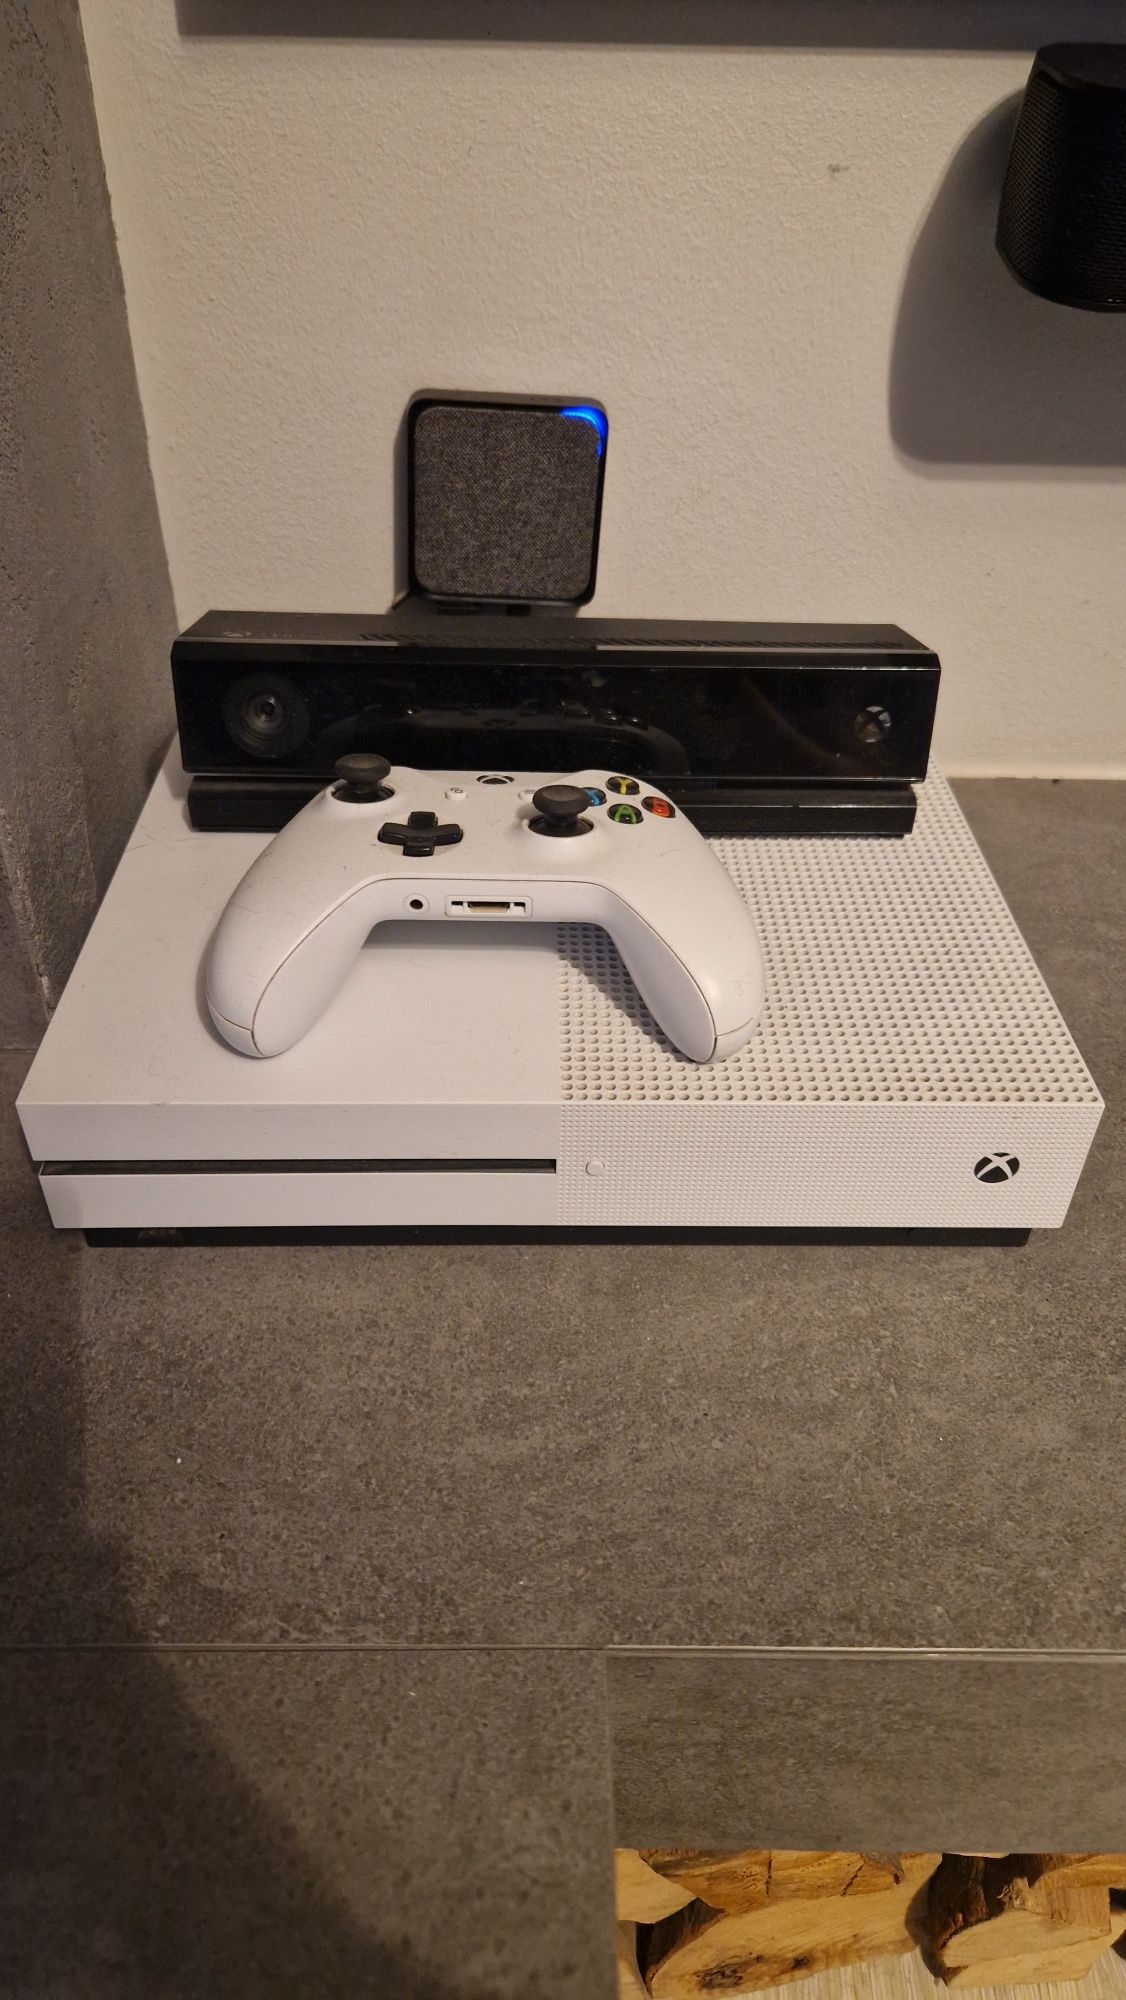 Xbox One S 500GB + Kinect + Pad Komplet